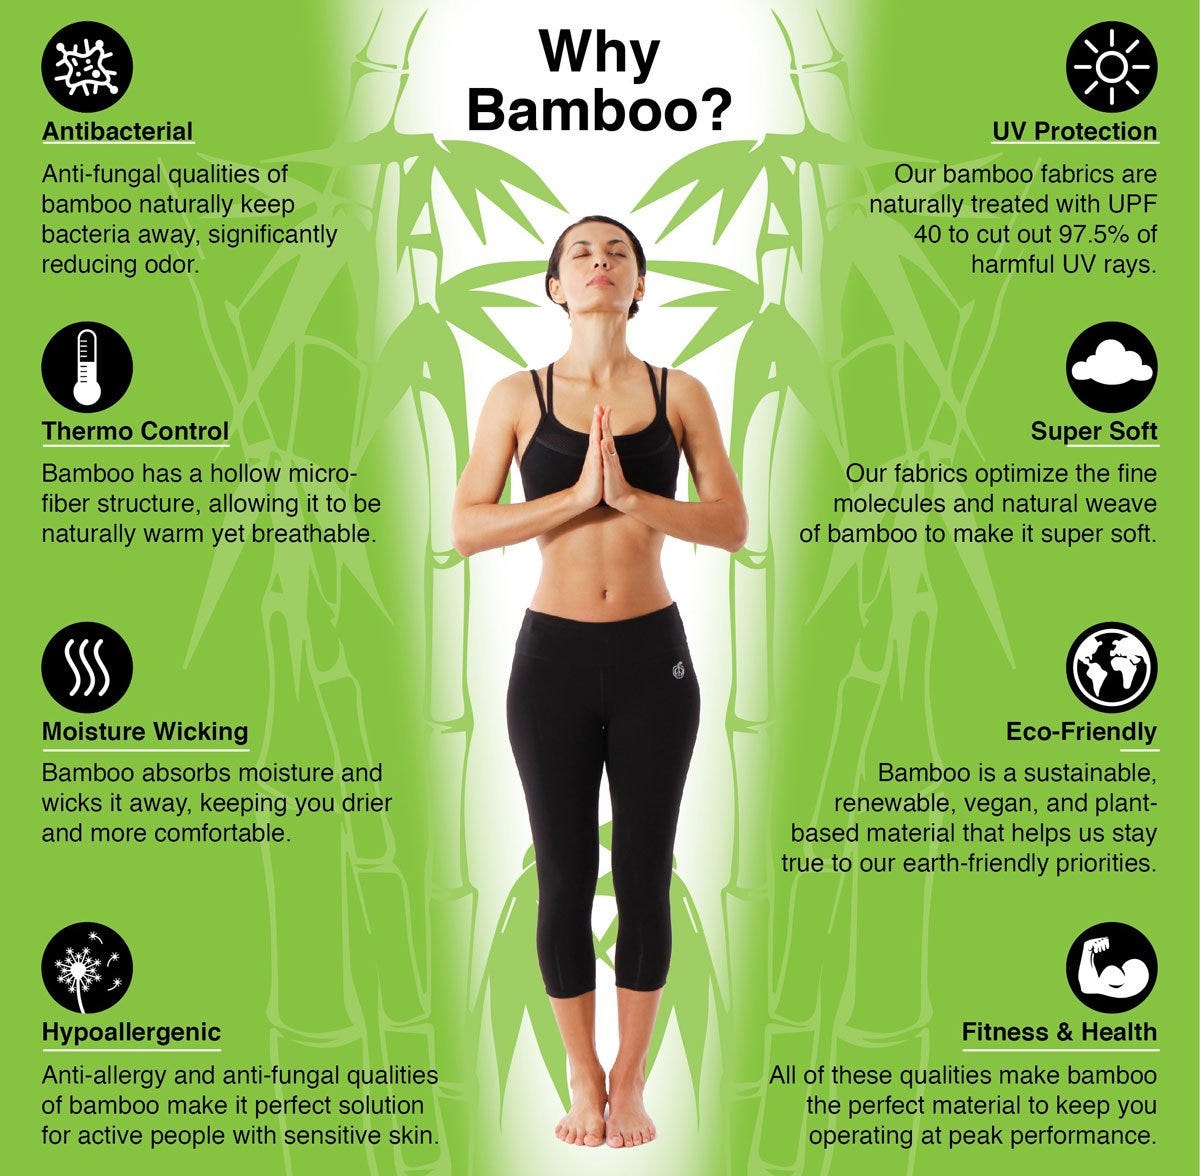 Why choose Bamboo for your yoga apparel?